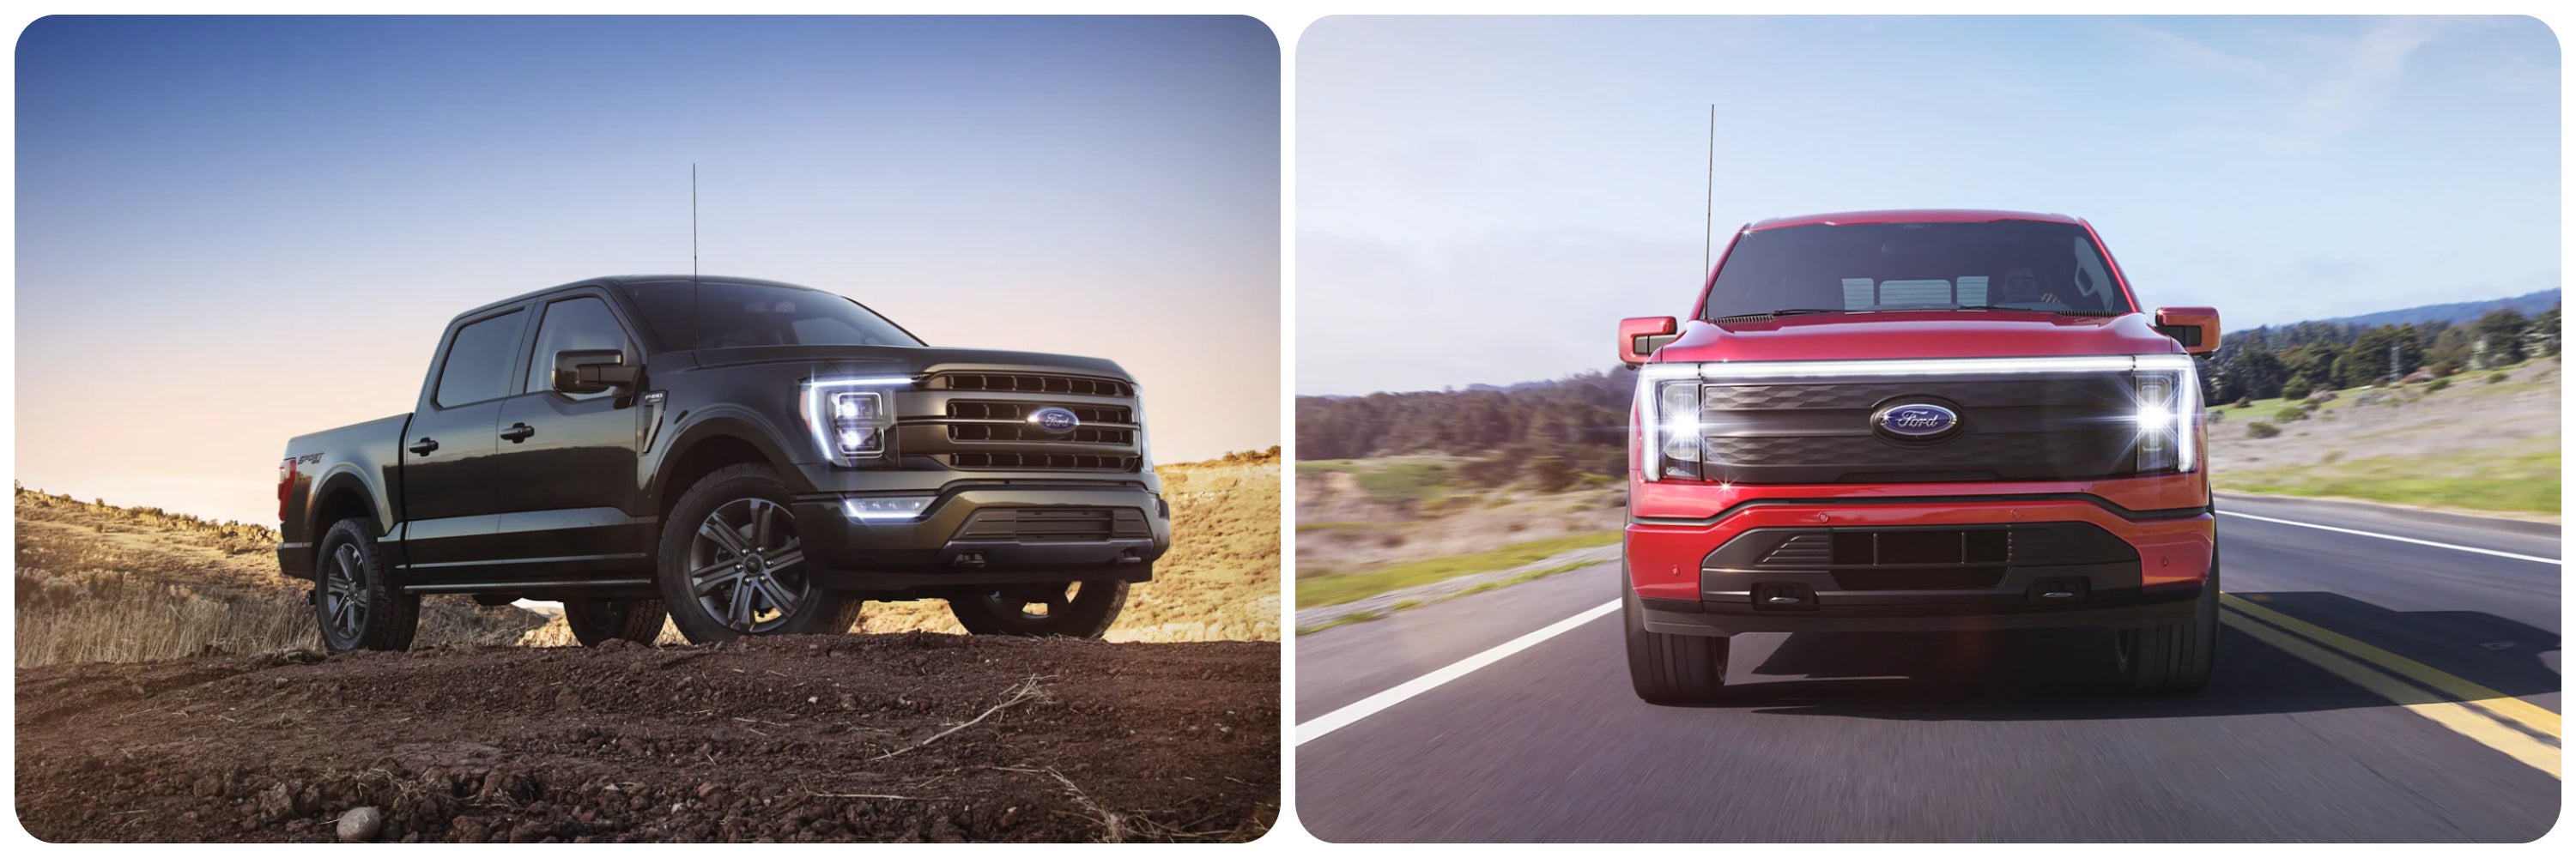 On the left a gray 2023 Ford F-150 and on the left a red 2023 Ford F-150 Lightning